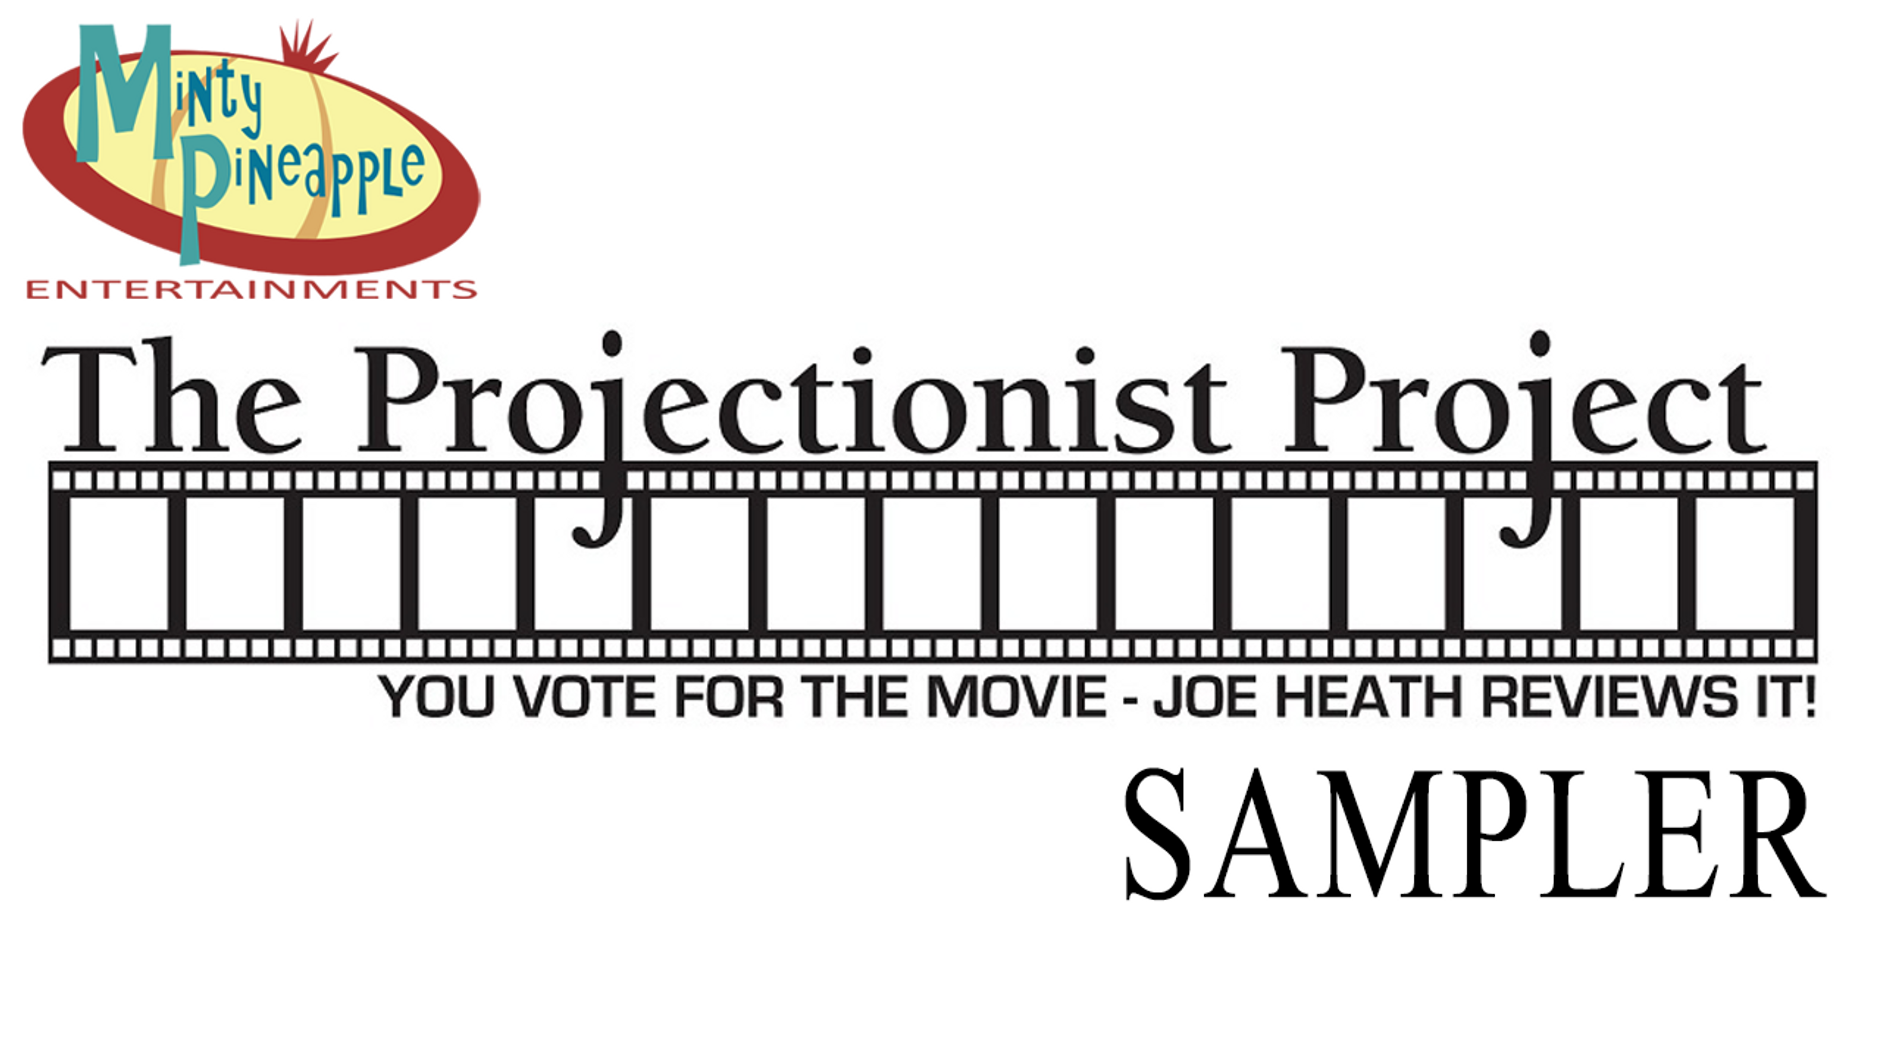 The Projectionist Project